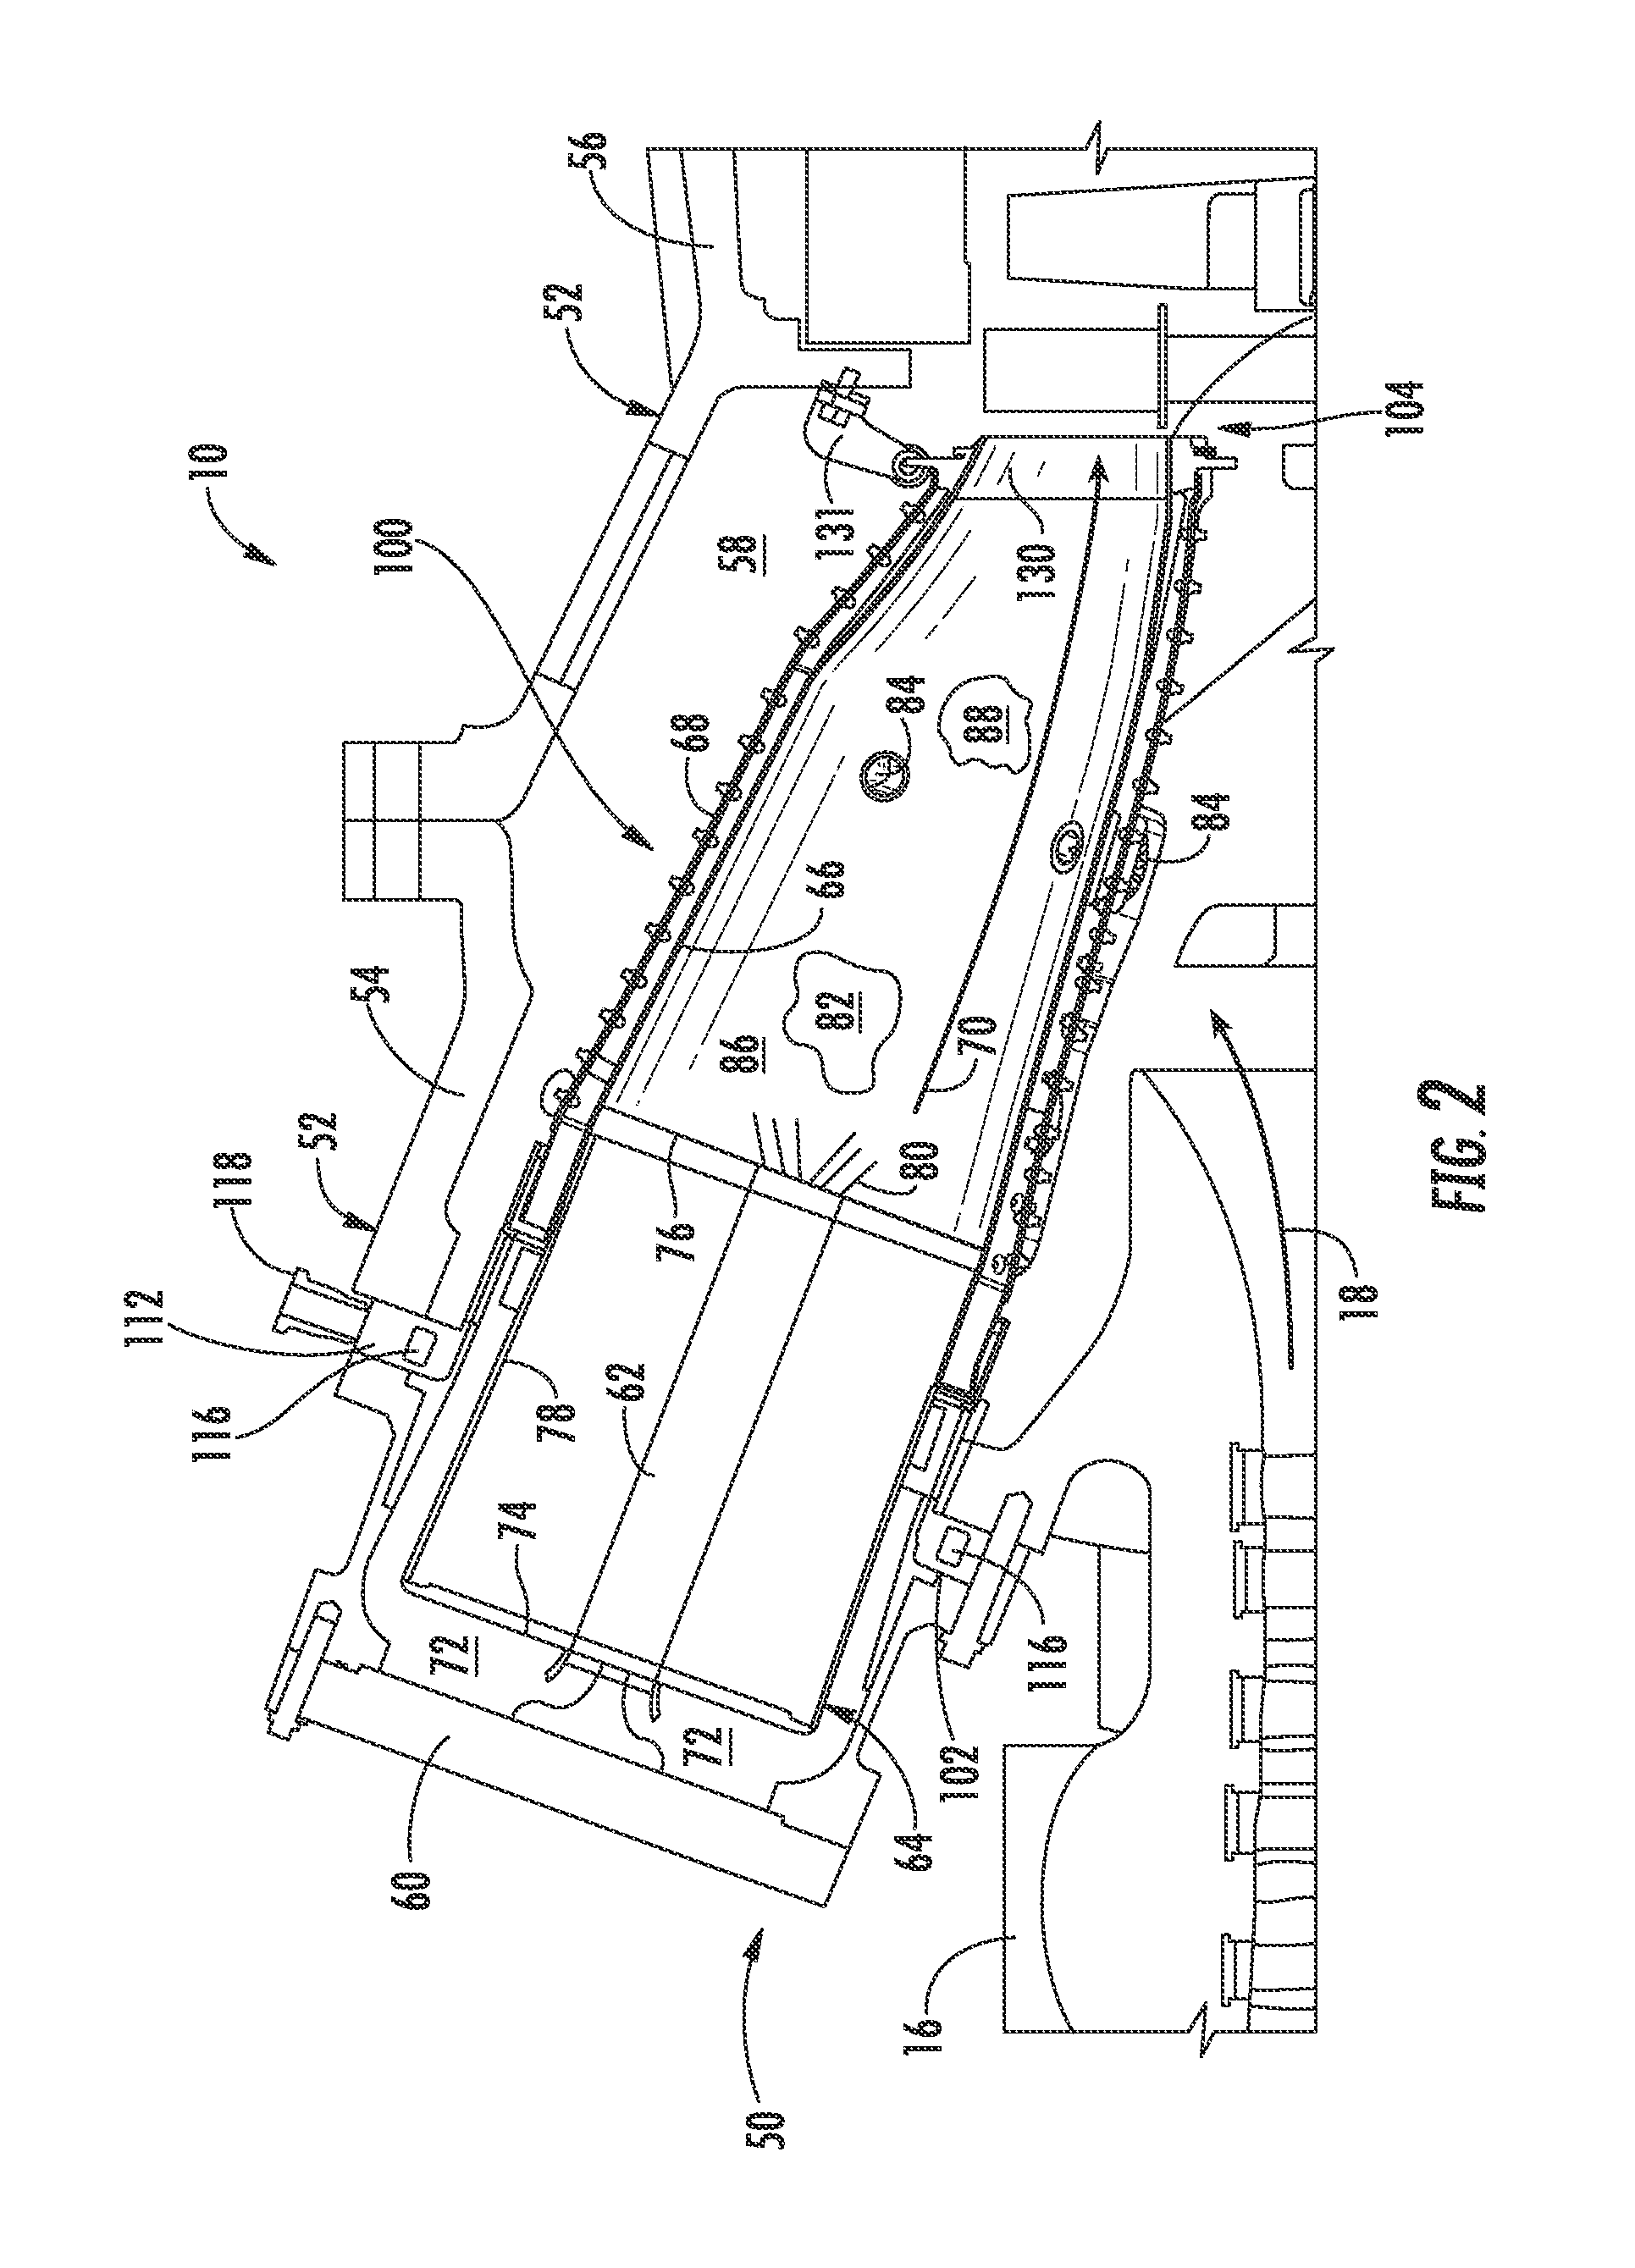 Flow sleeve for a combustion module of a gas turbine